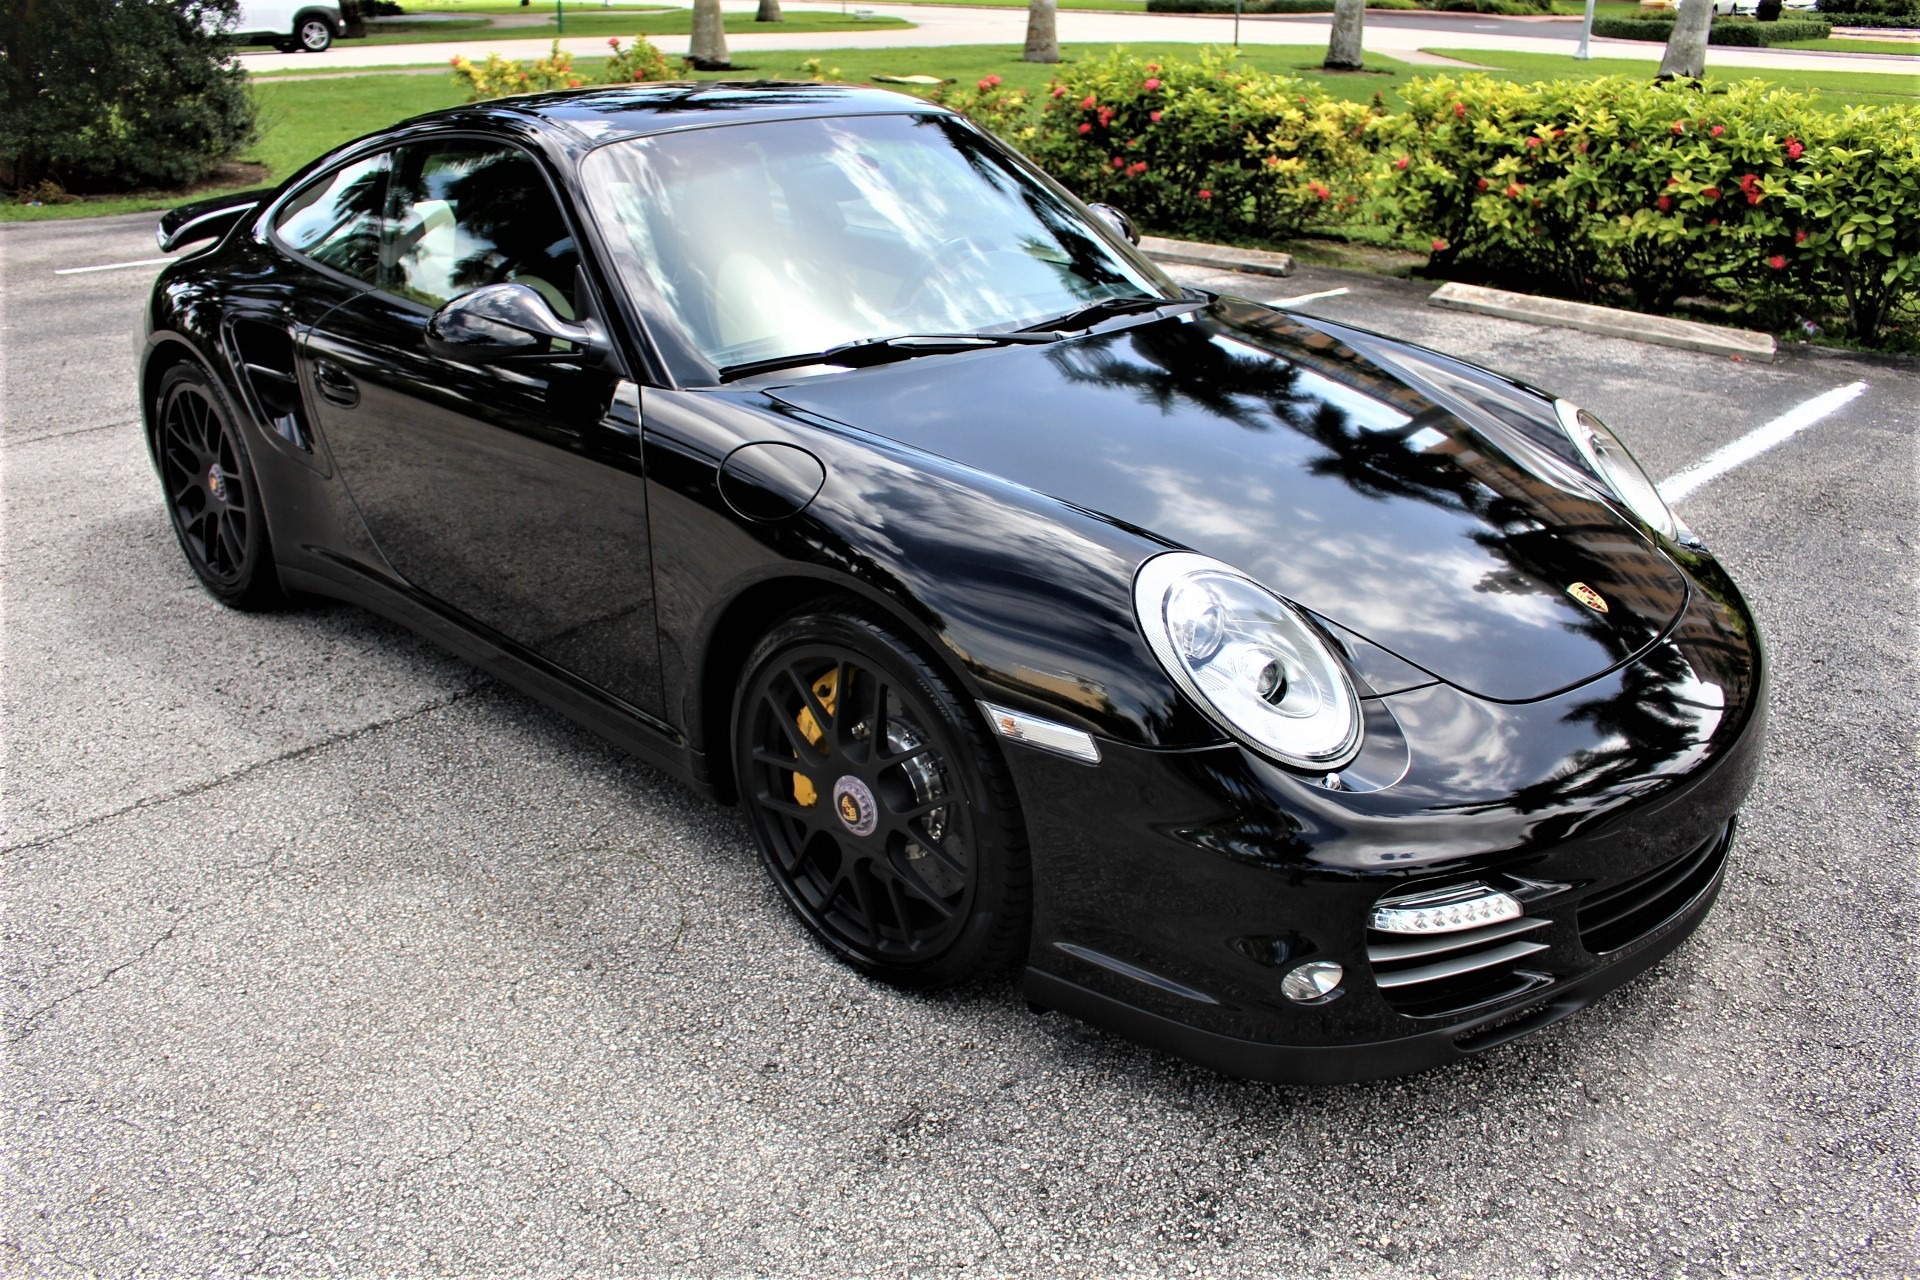 Used 2011 Porsche 911 Turbo S for sale Sold at The Gables Sports Cars in Miami FL 33146 3